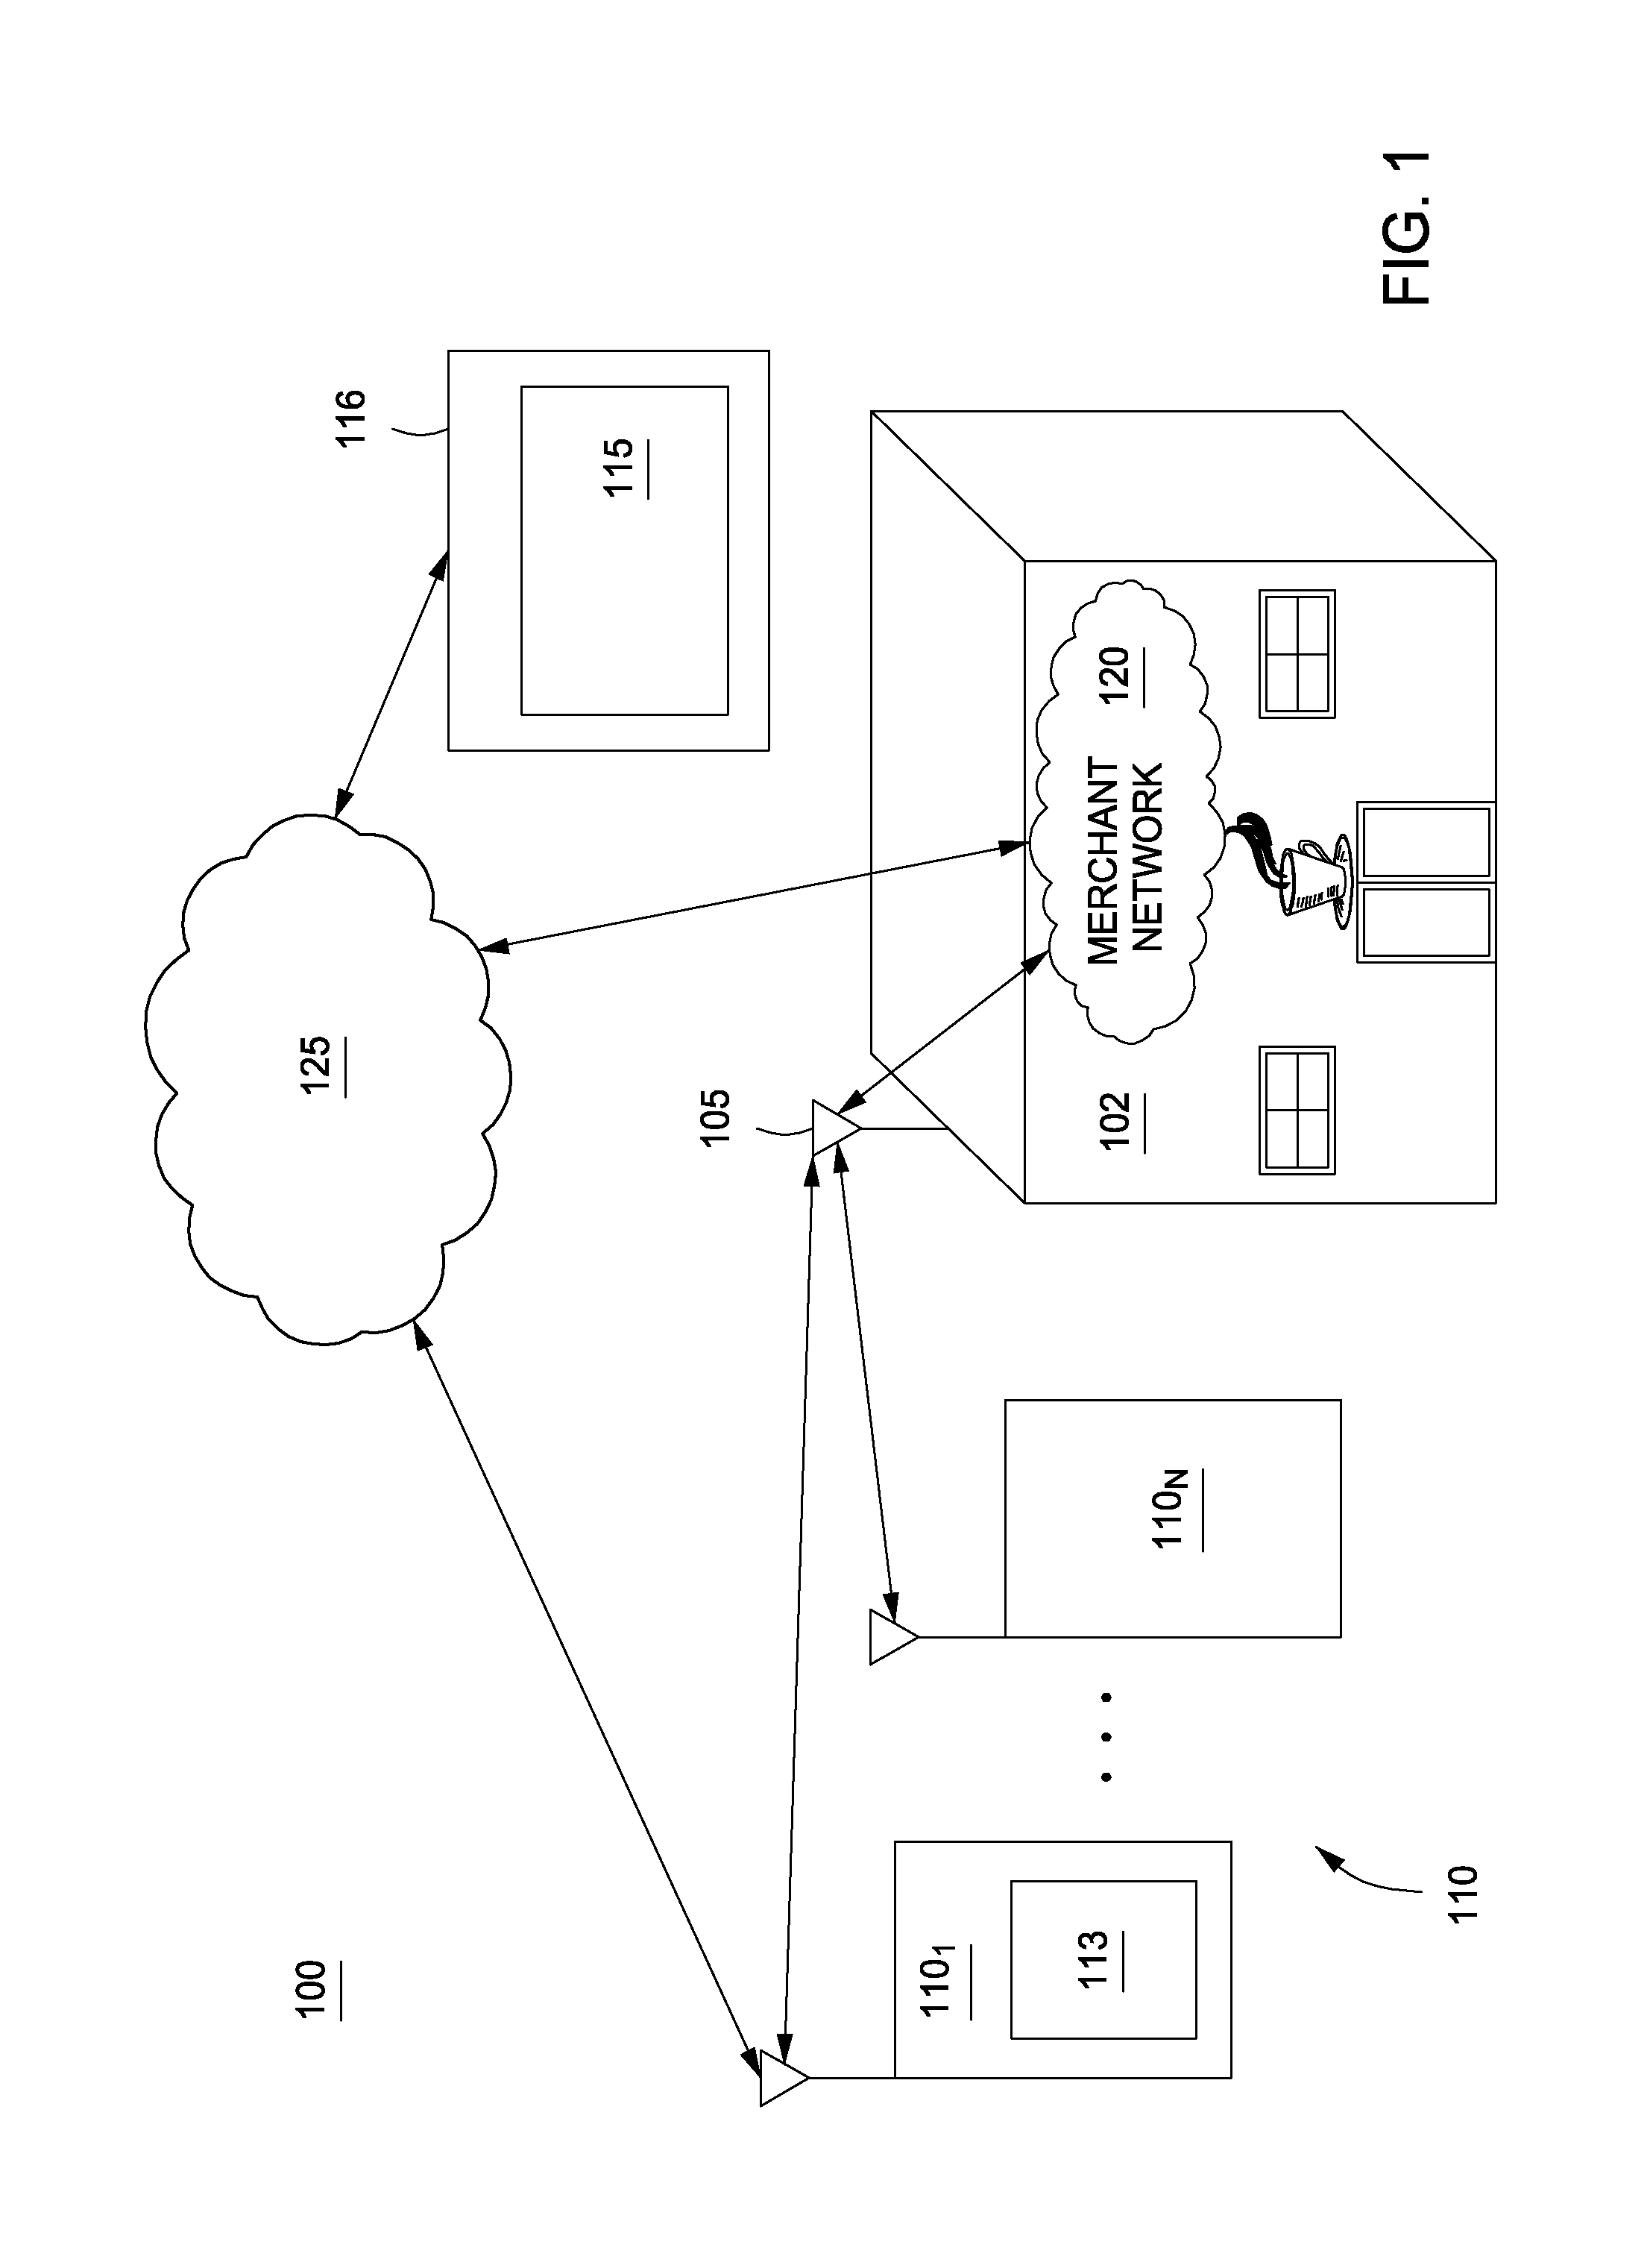 Method and system for offering merchant services and information through a common interface